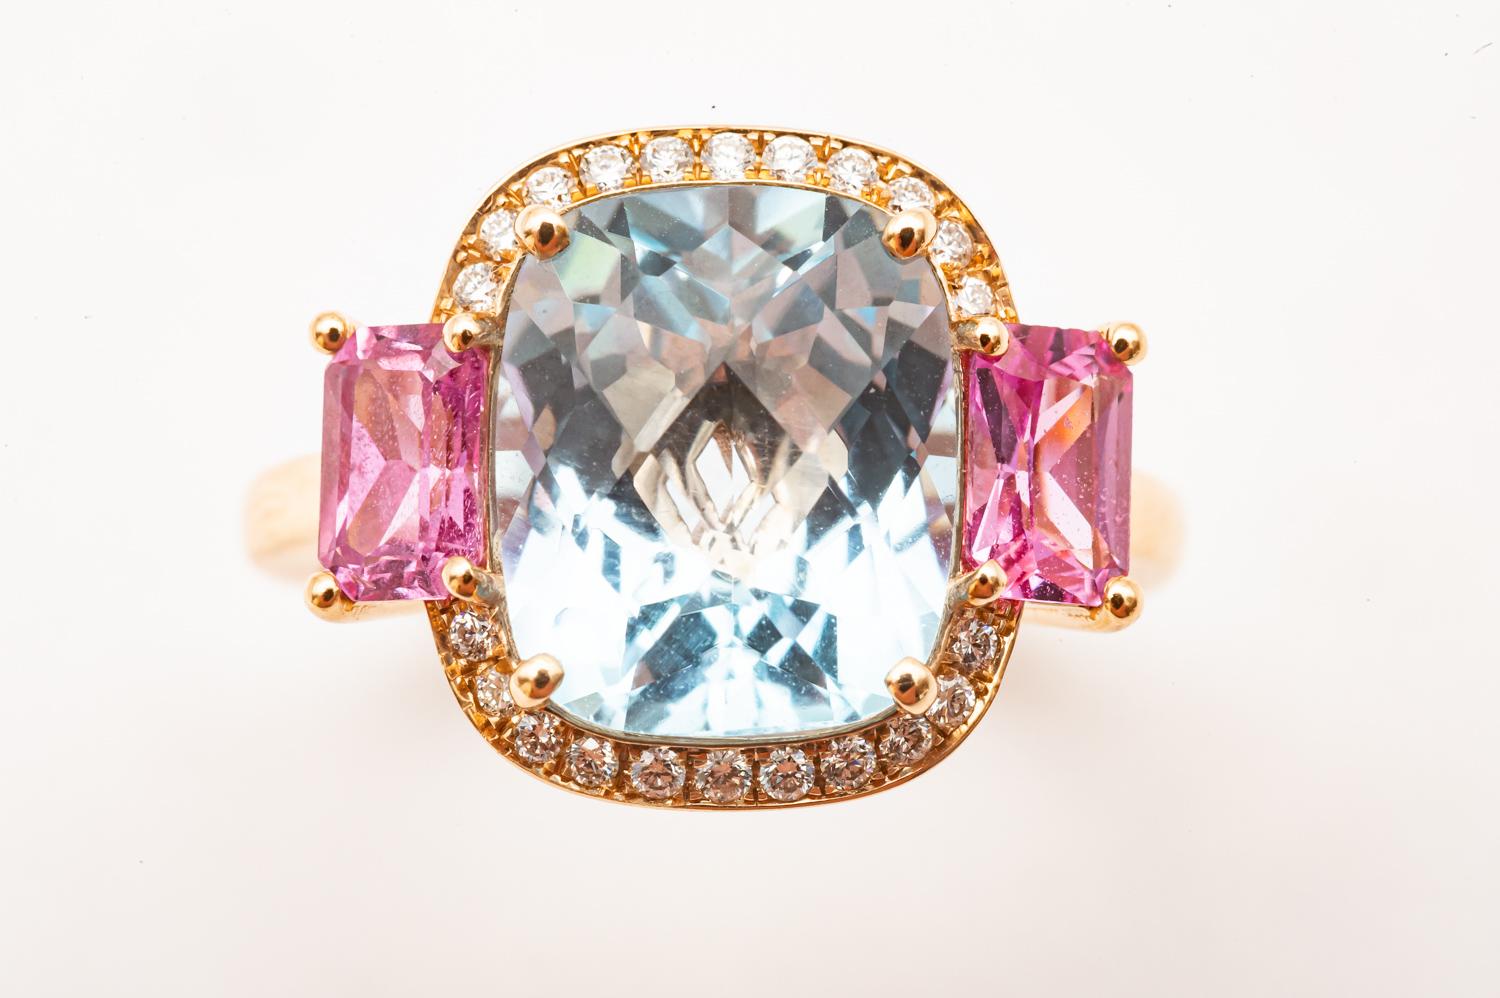 Discover the timeless elegance and sophisticated charm of this sumptuous 18K Yellow Gold Topaz, Pink Sapphire and Diamond Ring, which perfectly embodies the essence of the Art Deco style. Crafted with precision and adorned with three beautiful